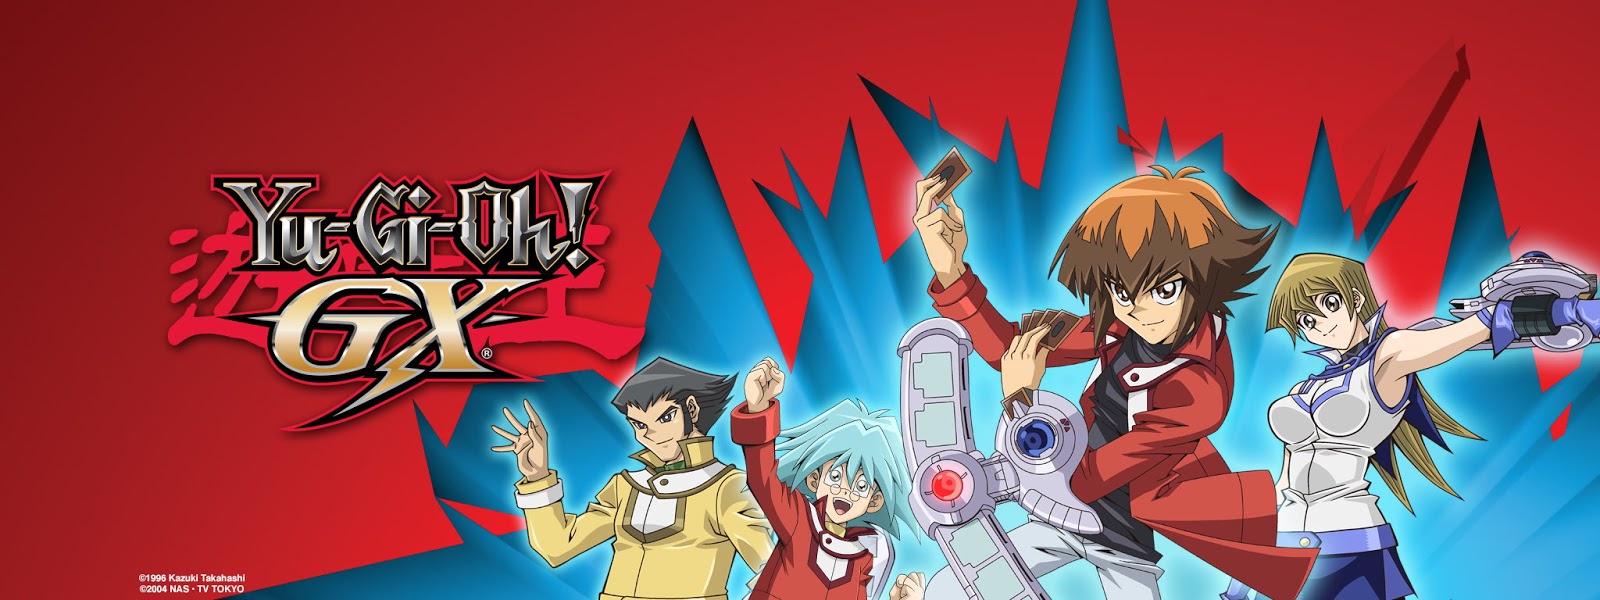 ﻿Full Time Nonton Yugioh Gx Sub Indo Best Reviews